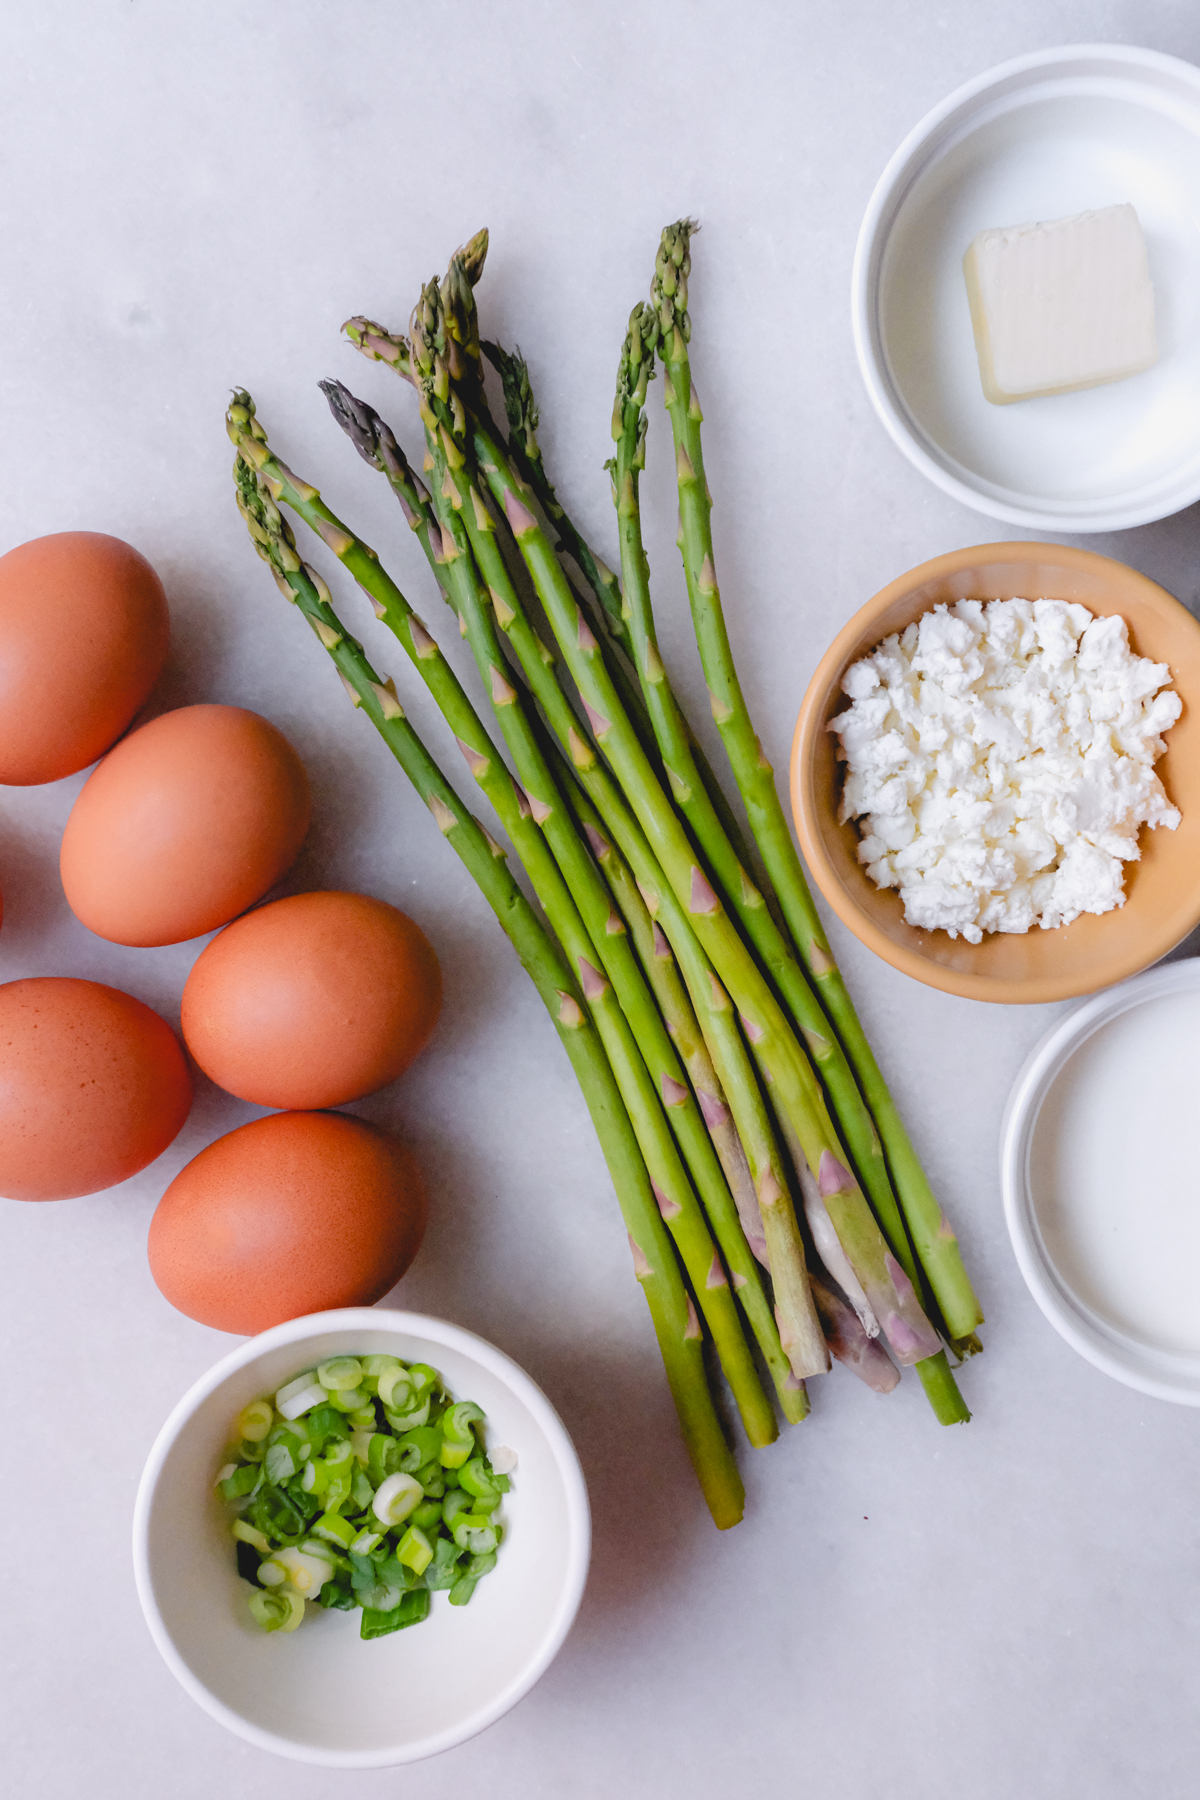 ingredients needed for a spring green onion asparagus frittata including eggs, asparagus, goat cheese, butter, and milk.